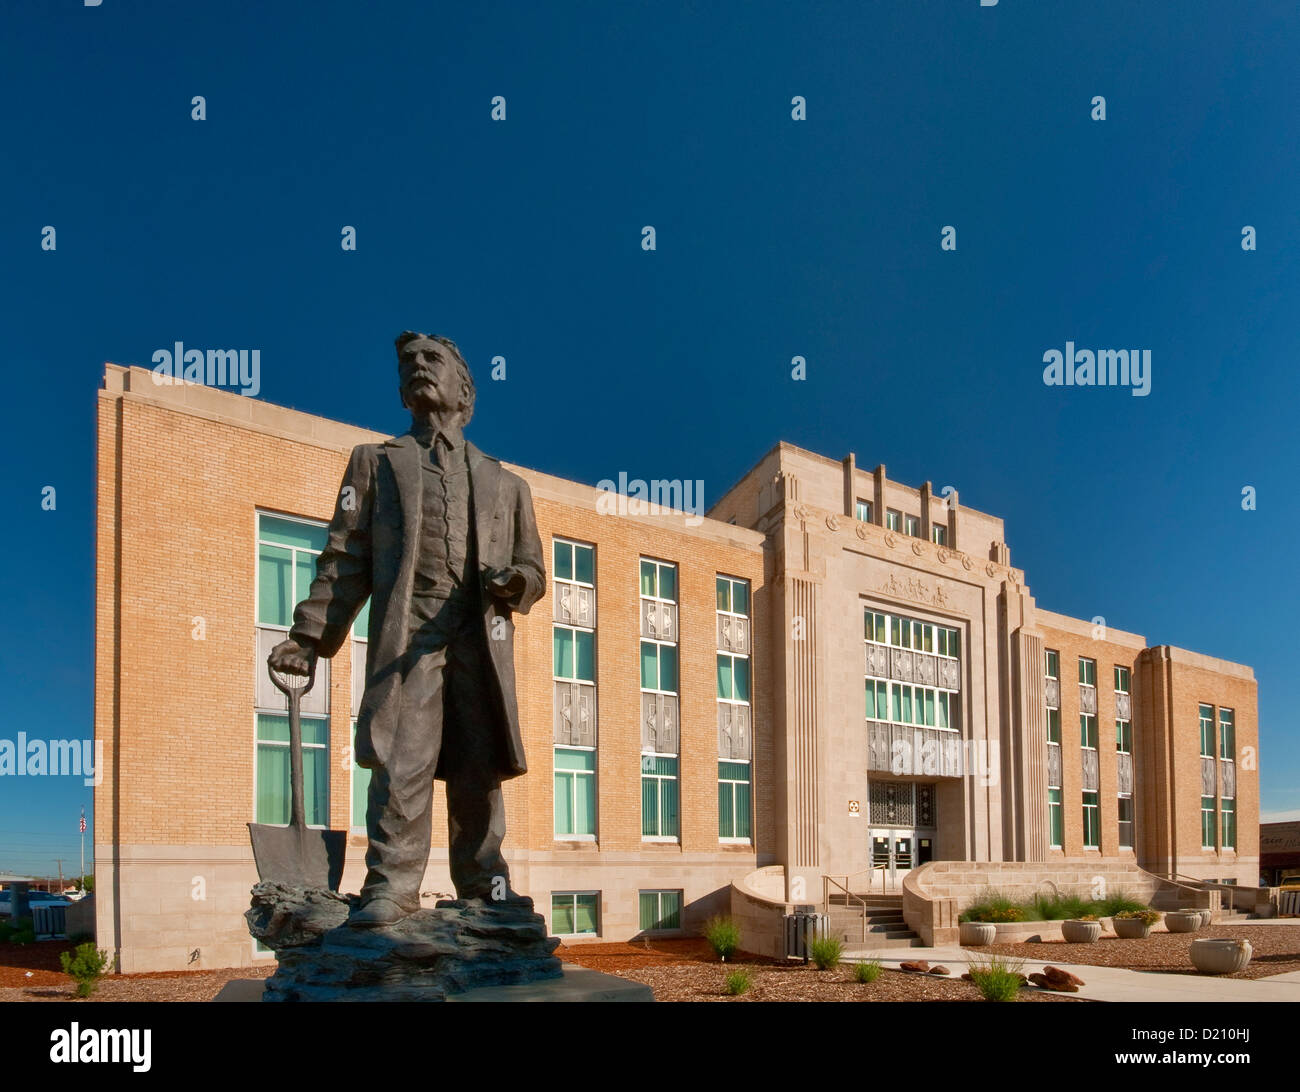 Statue of Washington E Lindsey in front of Roosevelt County Courthouse in Portales, New Mexico, USA Stock Photo